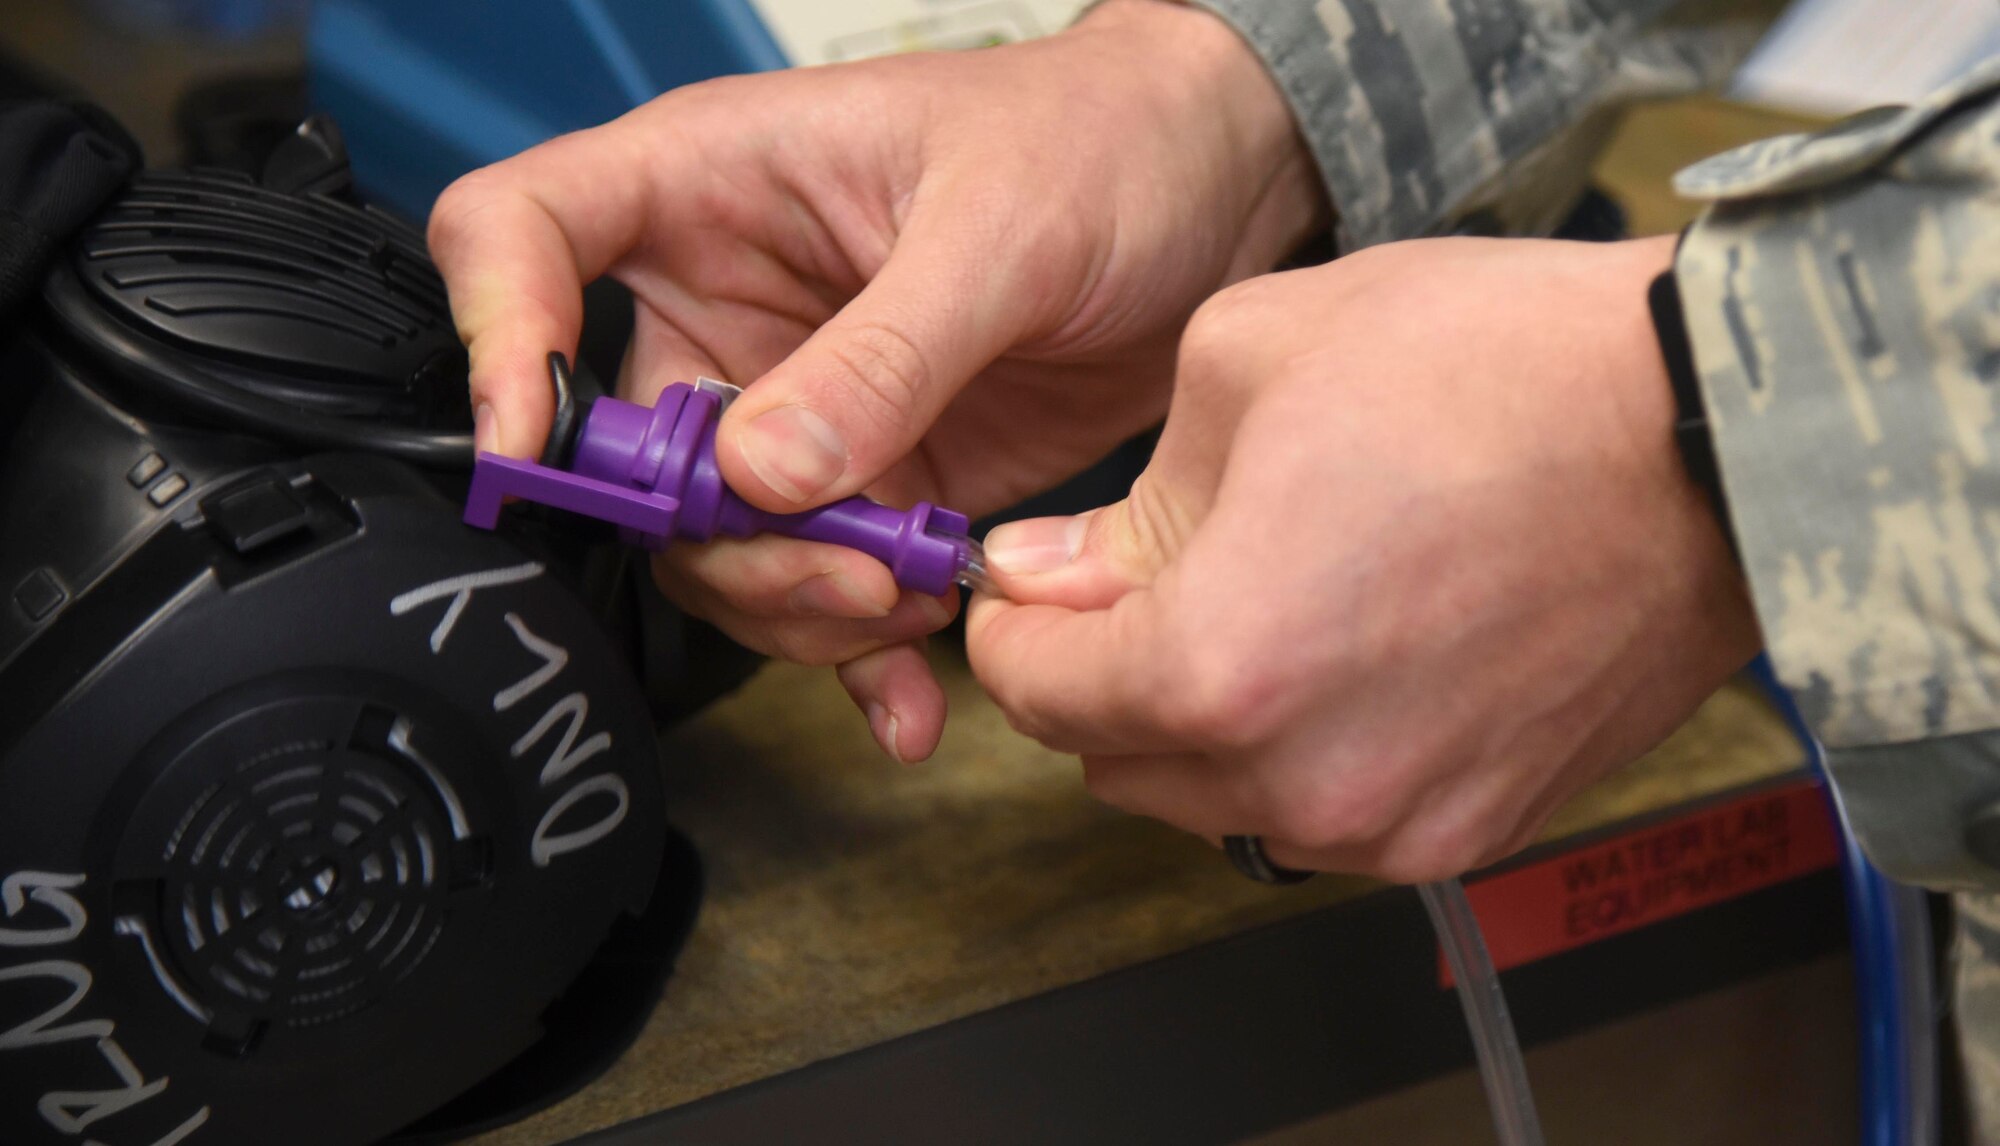 Senior Airman Ants Vahk, 92nd Aerospace Medicine Squadron bioenvironmental engineer, connects a hose to a gas mask Dec. 6, 2016 at Fairchild Air Force Base, Washington. The gas mask fit test sustains preparedness and readiness for Fairchild deployment mission. (U.S. Air Force photo/Senior Airman Nick J. Daniello)